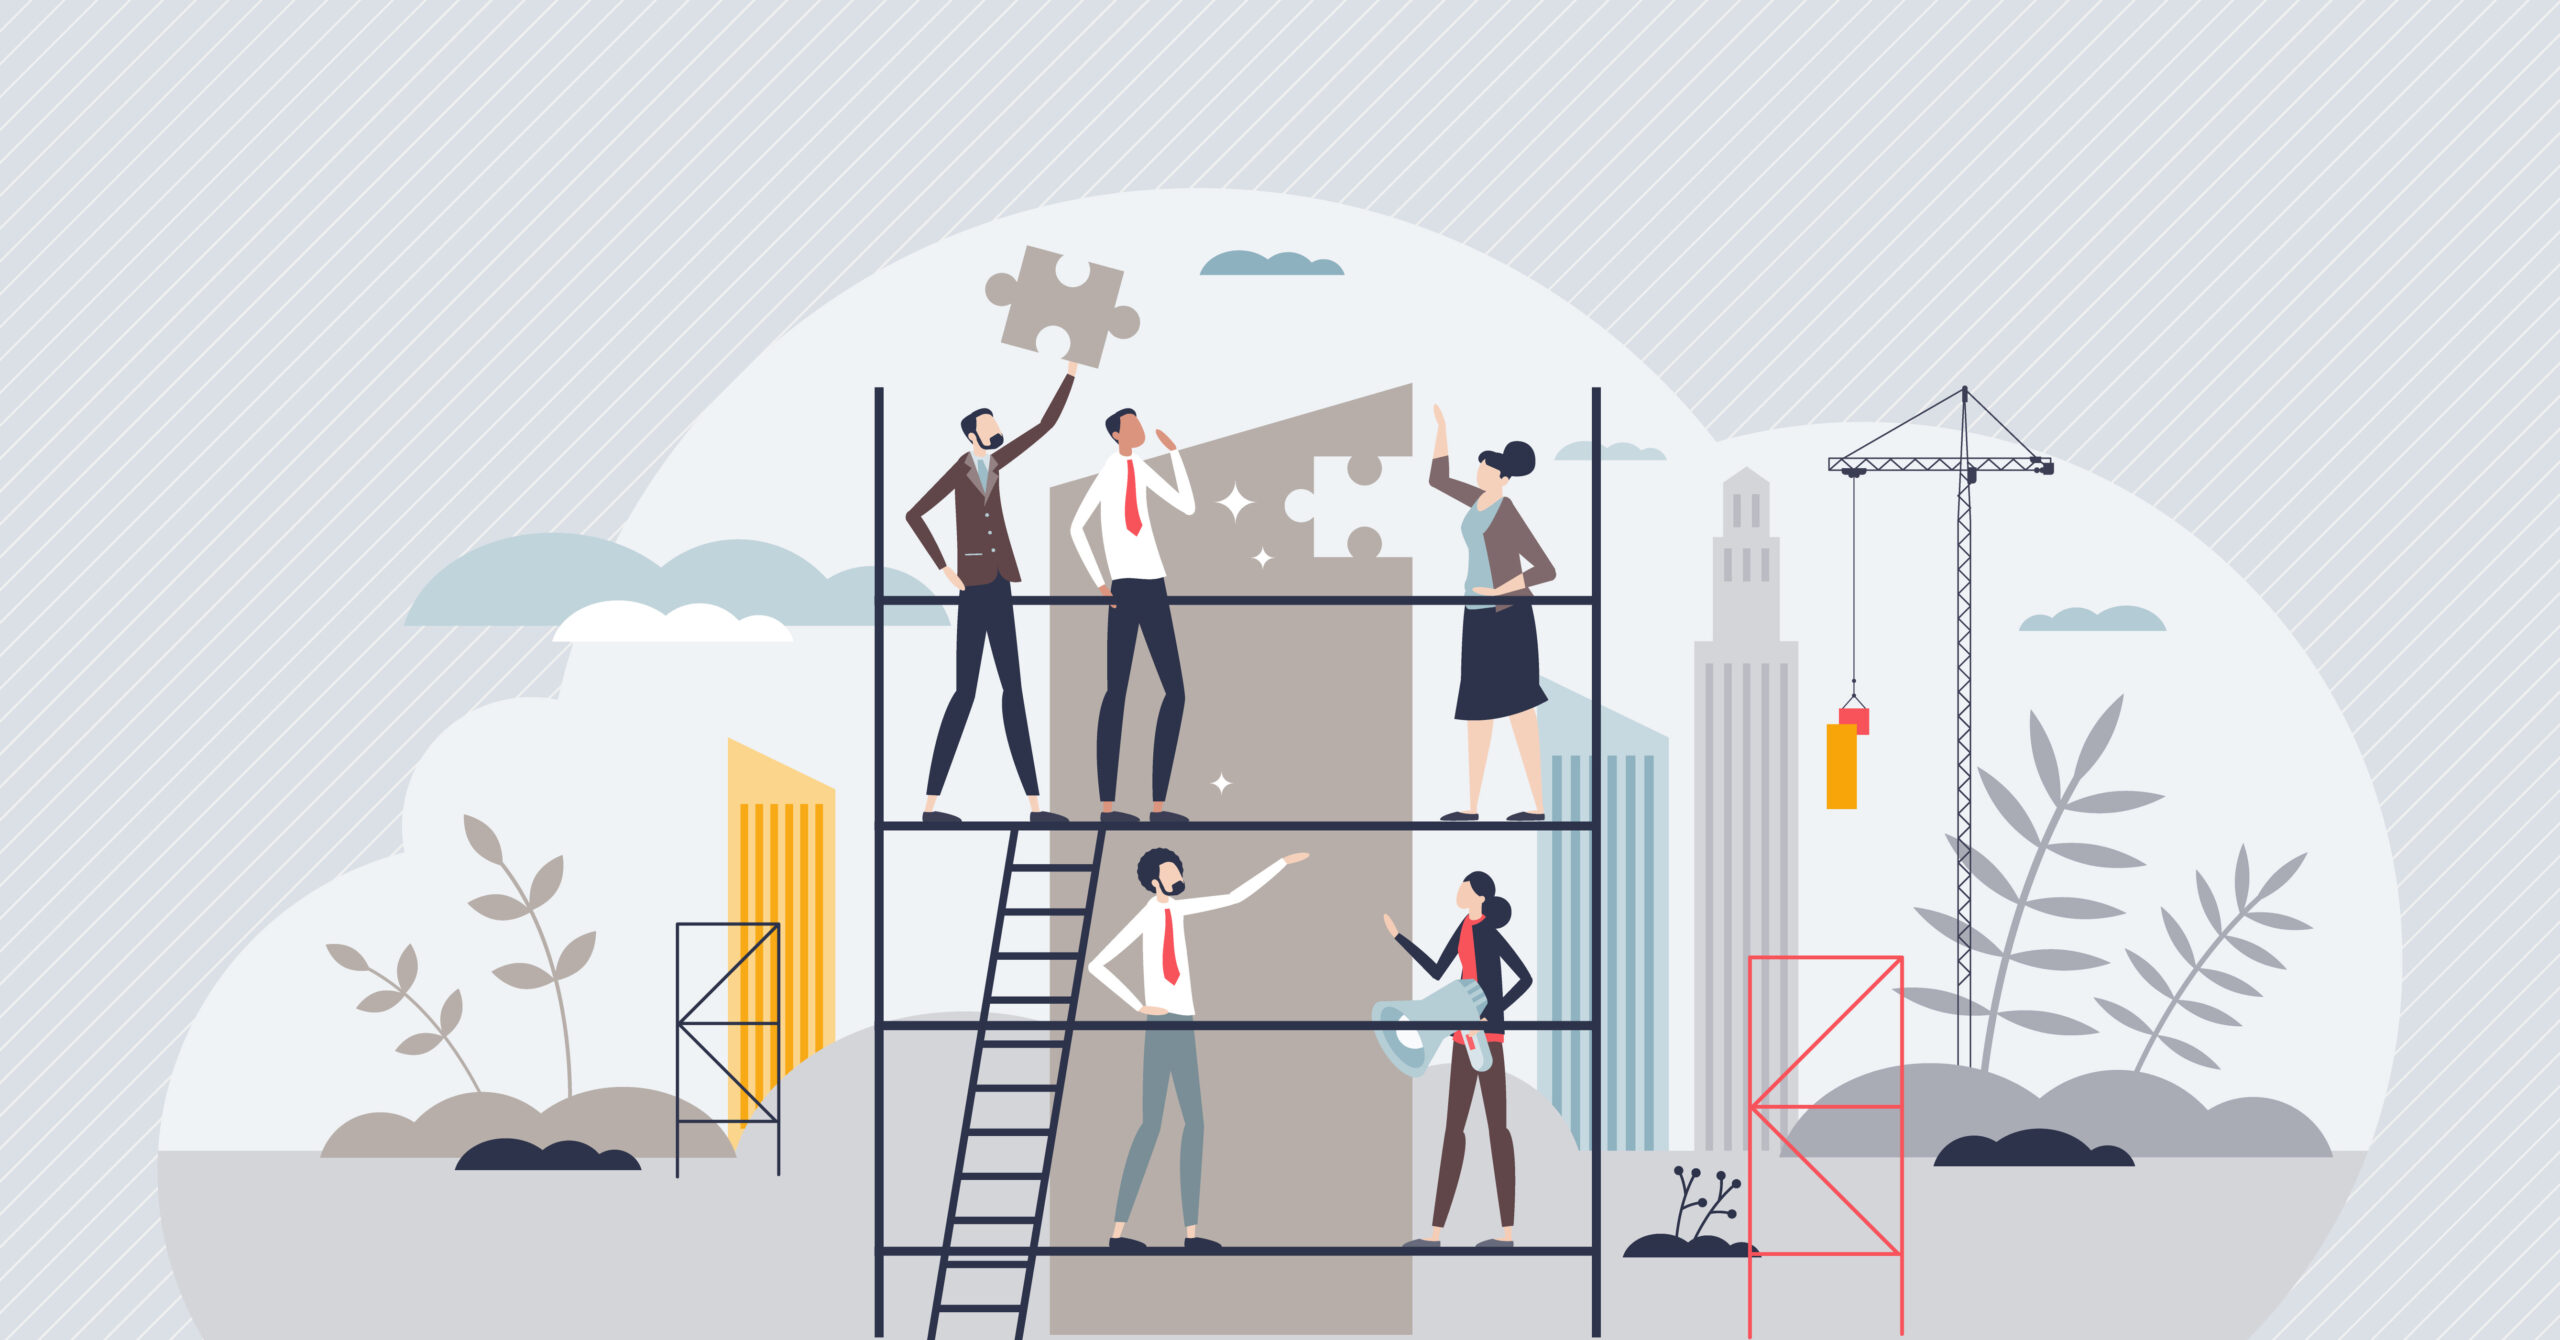 An illustration of people working on a structure together [It's a Strategy, NOT a Department]